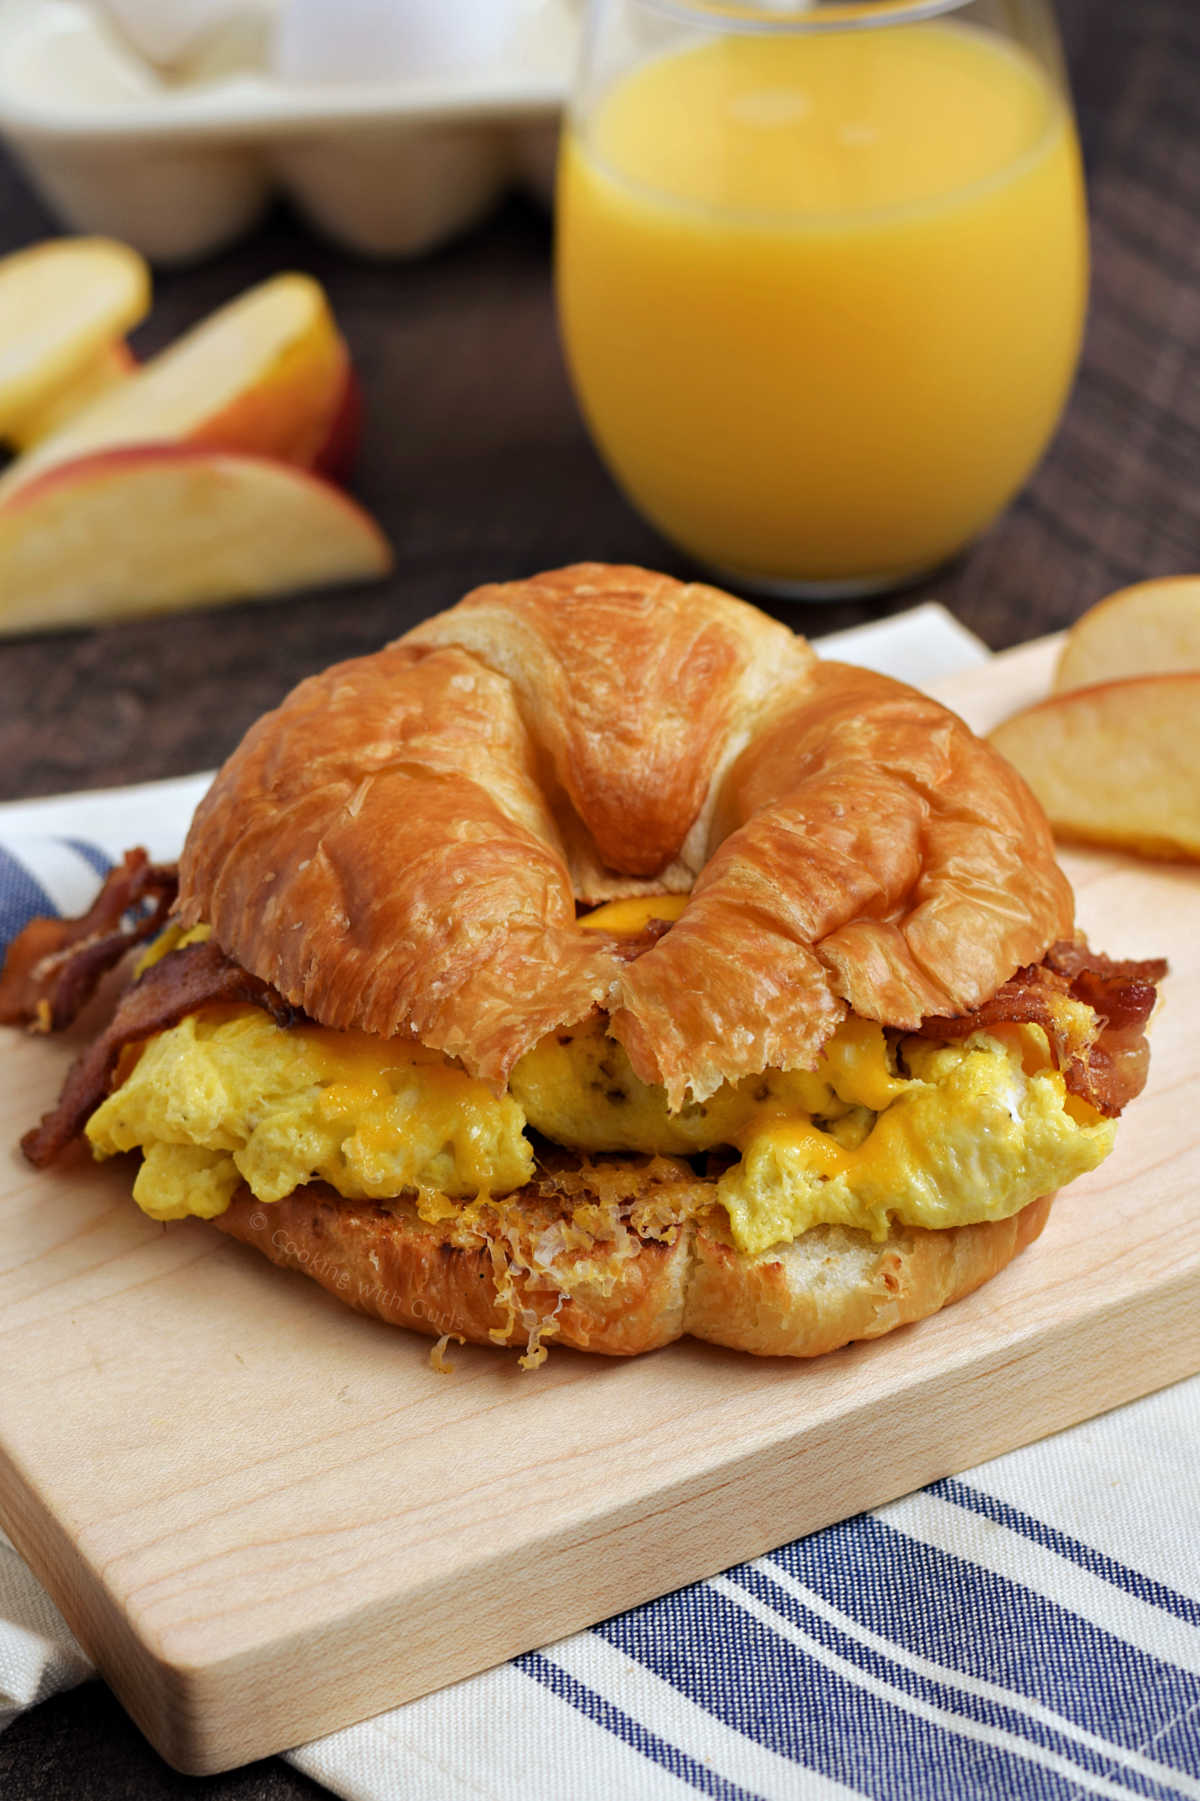 Bacon, scrambled egg, and melted cheese on a croissant sitting on a wooden board, with orange juice in the background.